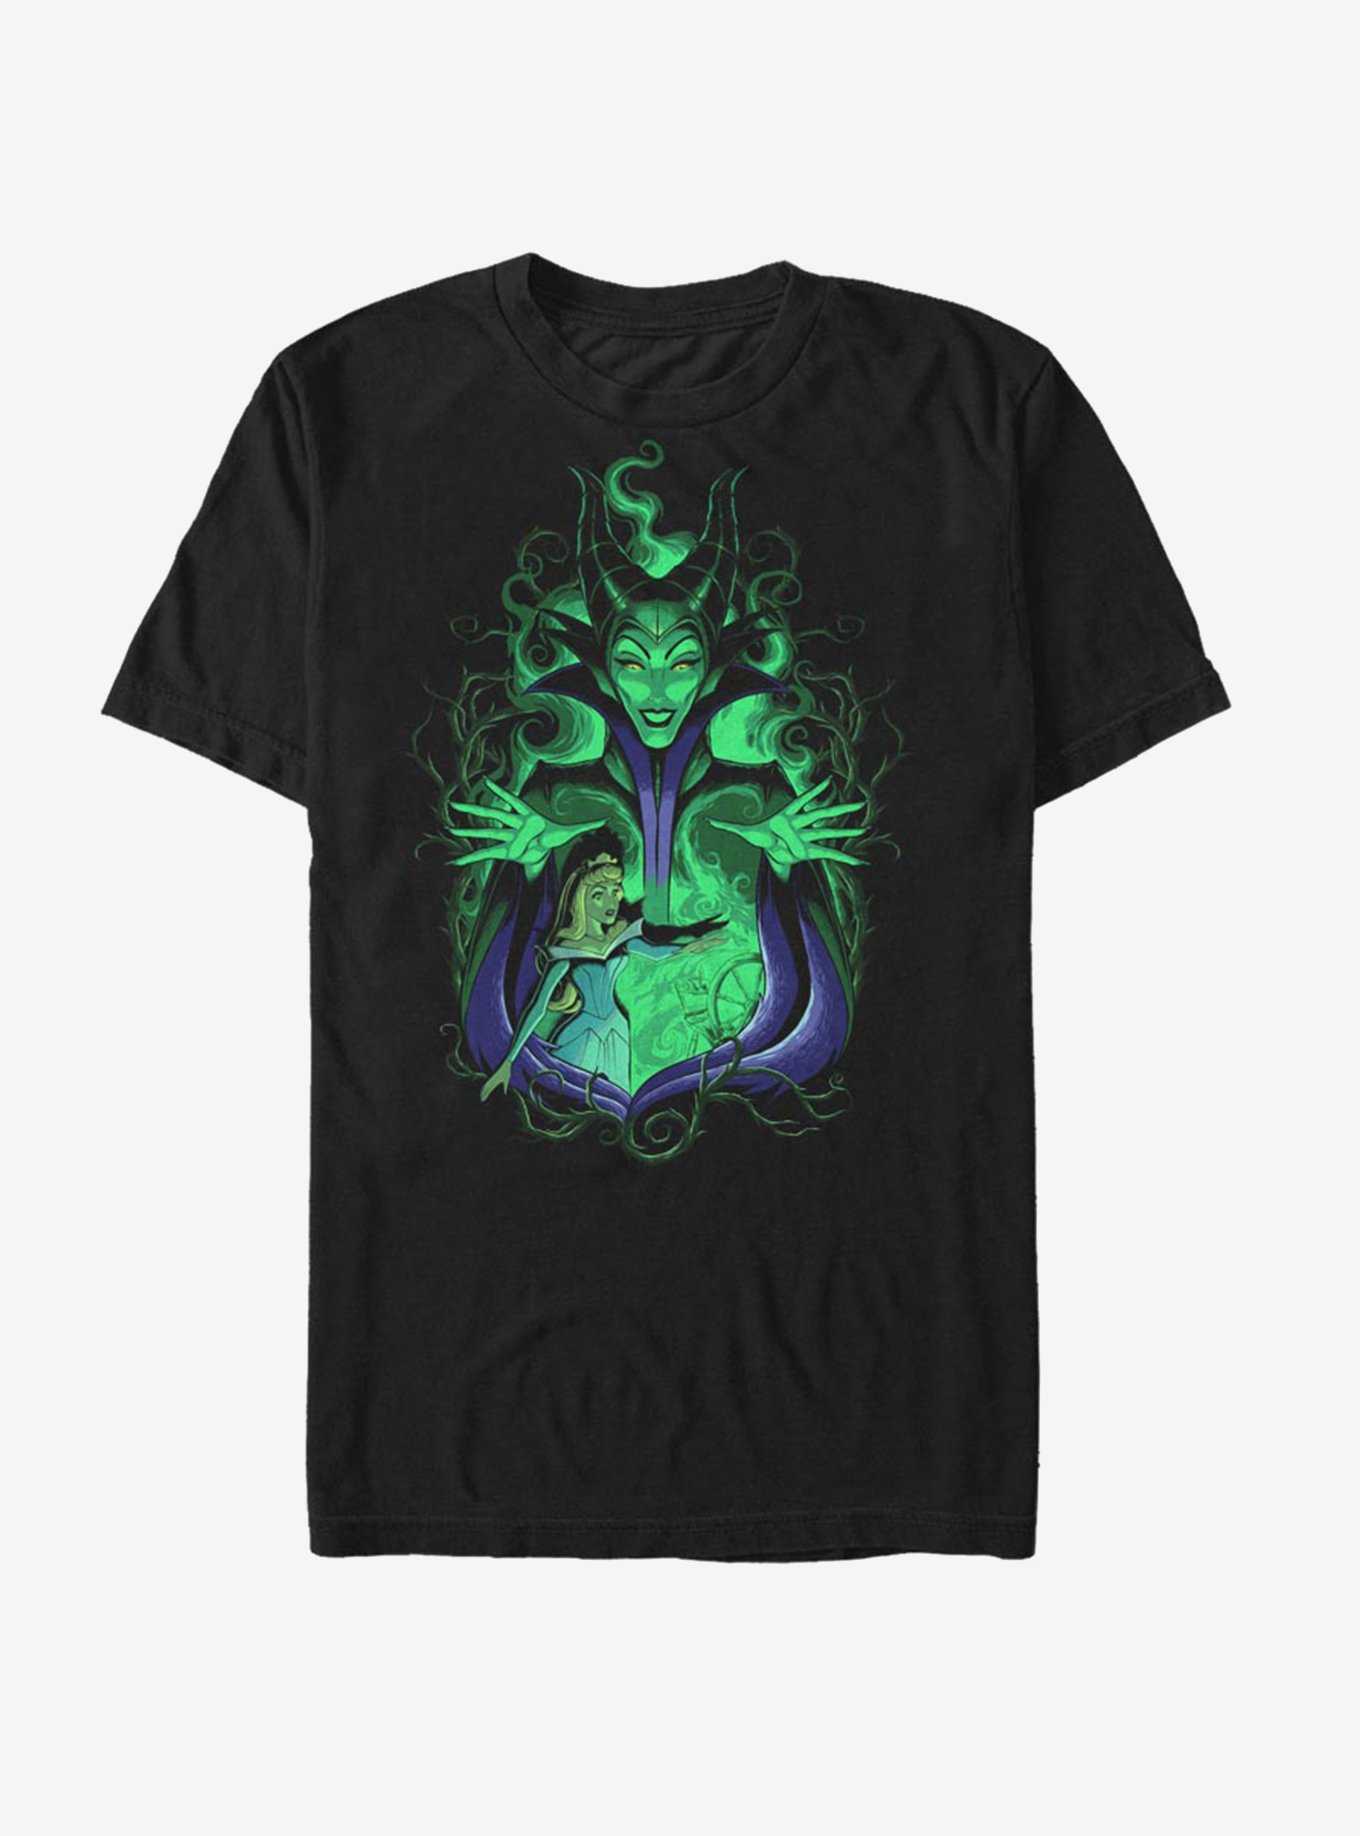 Disney Sleeping Beauty Maleficent Touch The Spindle T-Shirt, , hi-res